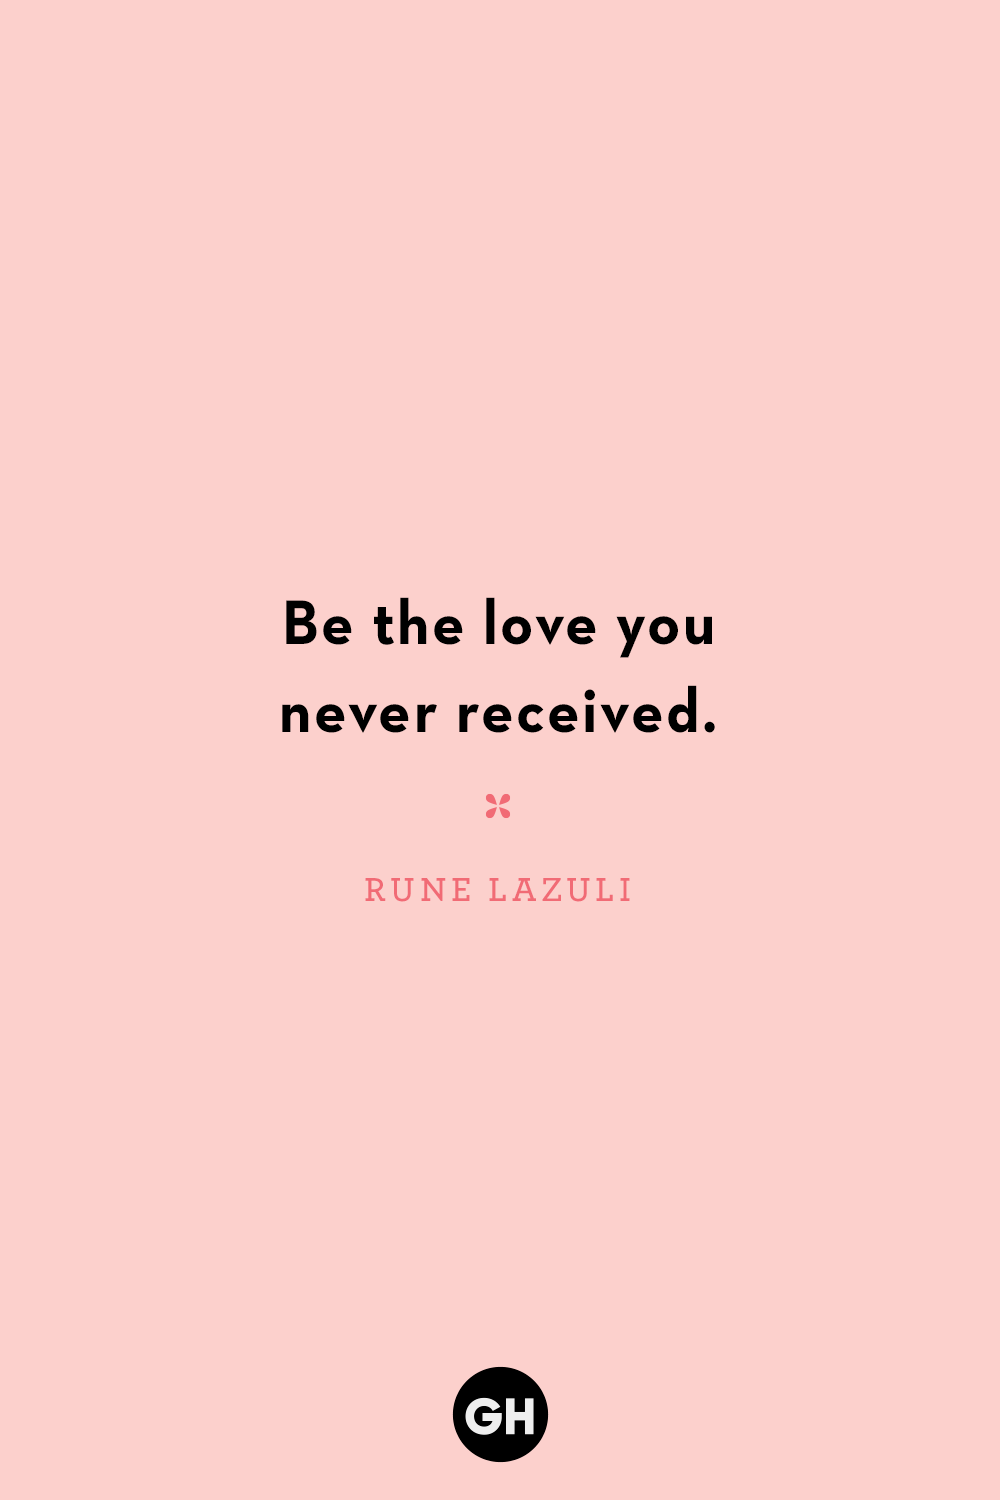 20 Best Self Love Quotes - Confidence Booster Quotes and Sayings